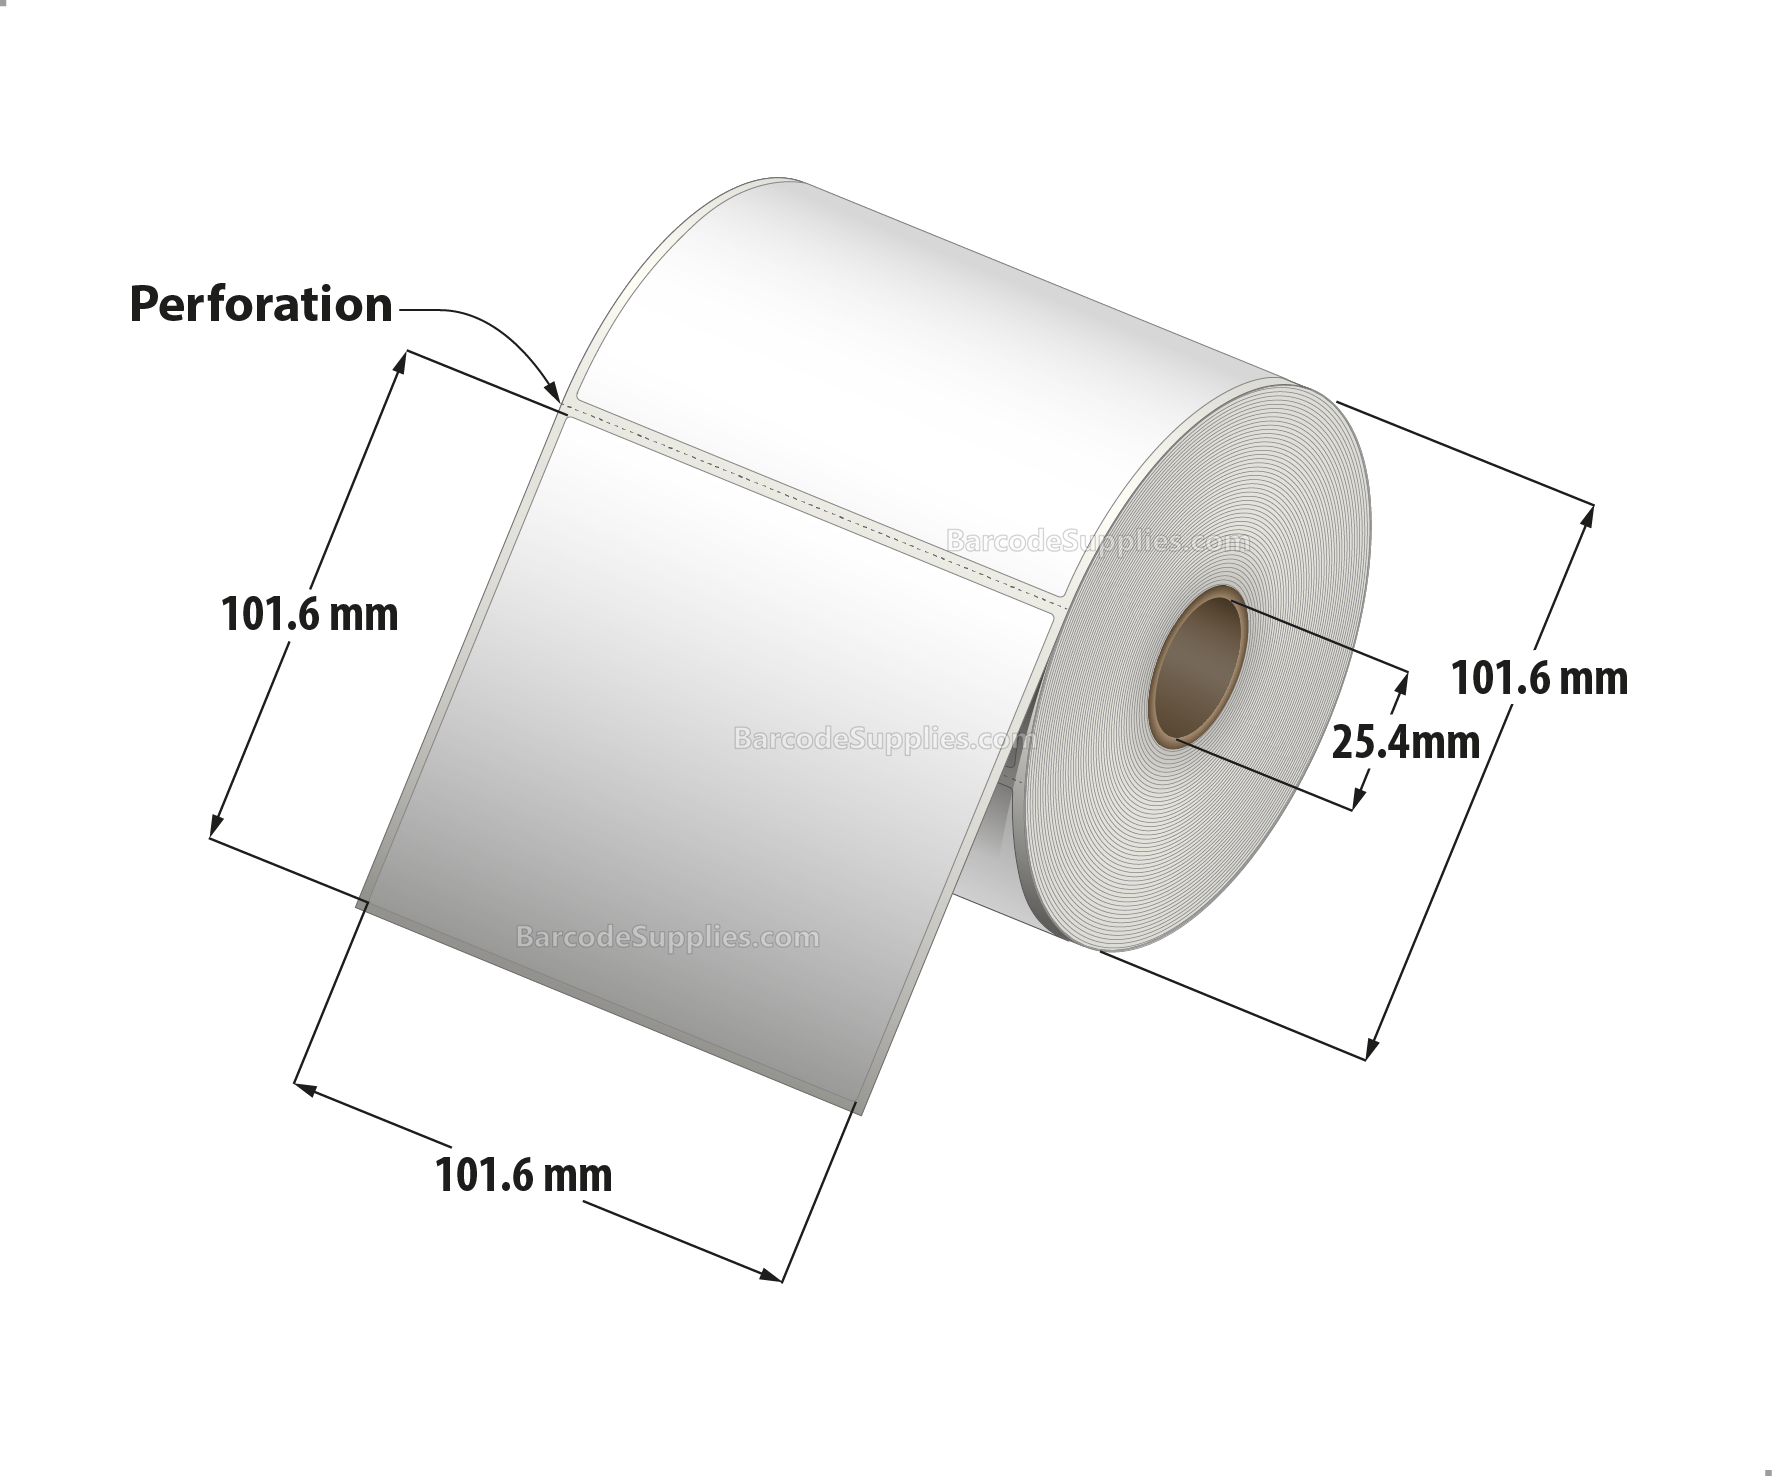 4 x 4 Thermal Transfer White Labels With Permanent Acrylic Adhesive - Perforated - 375 Labels Per Roll - Carton Of 4 Rolls - 1500 Labels Total - MPN: TH44-14PTT